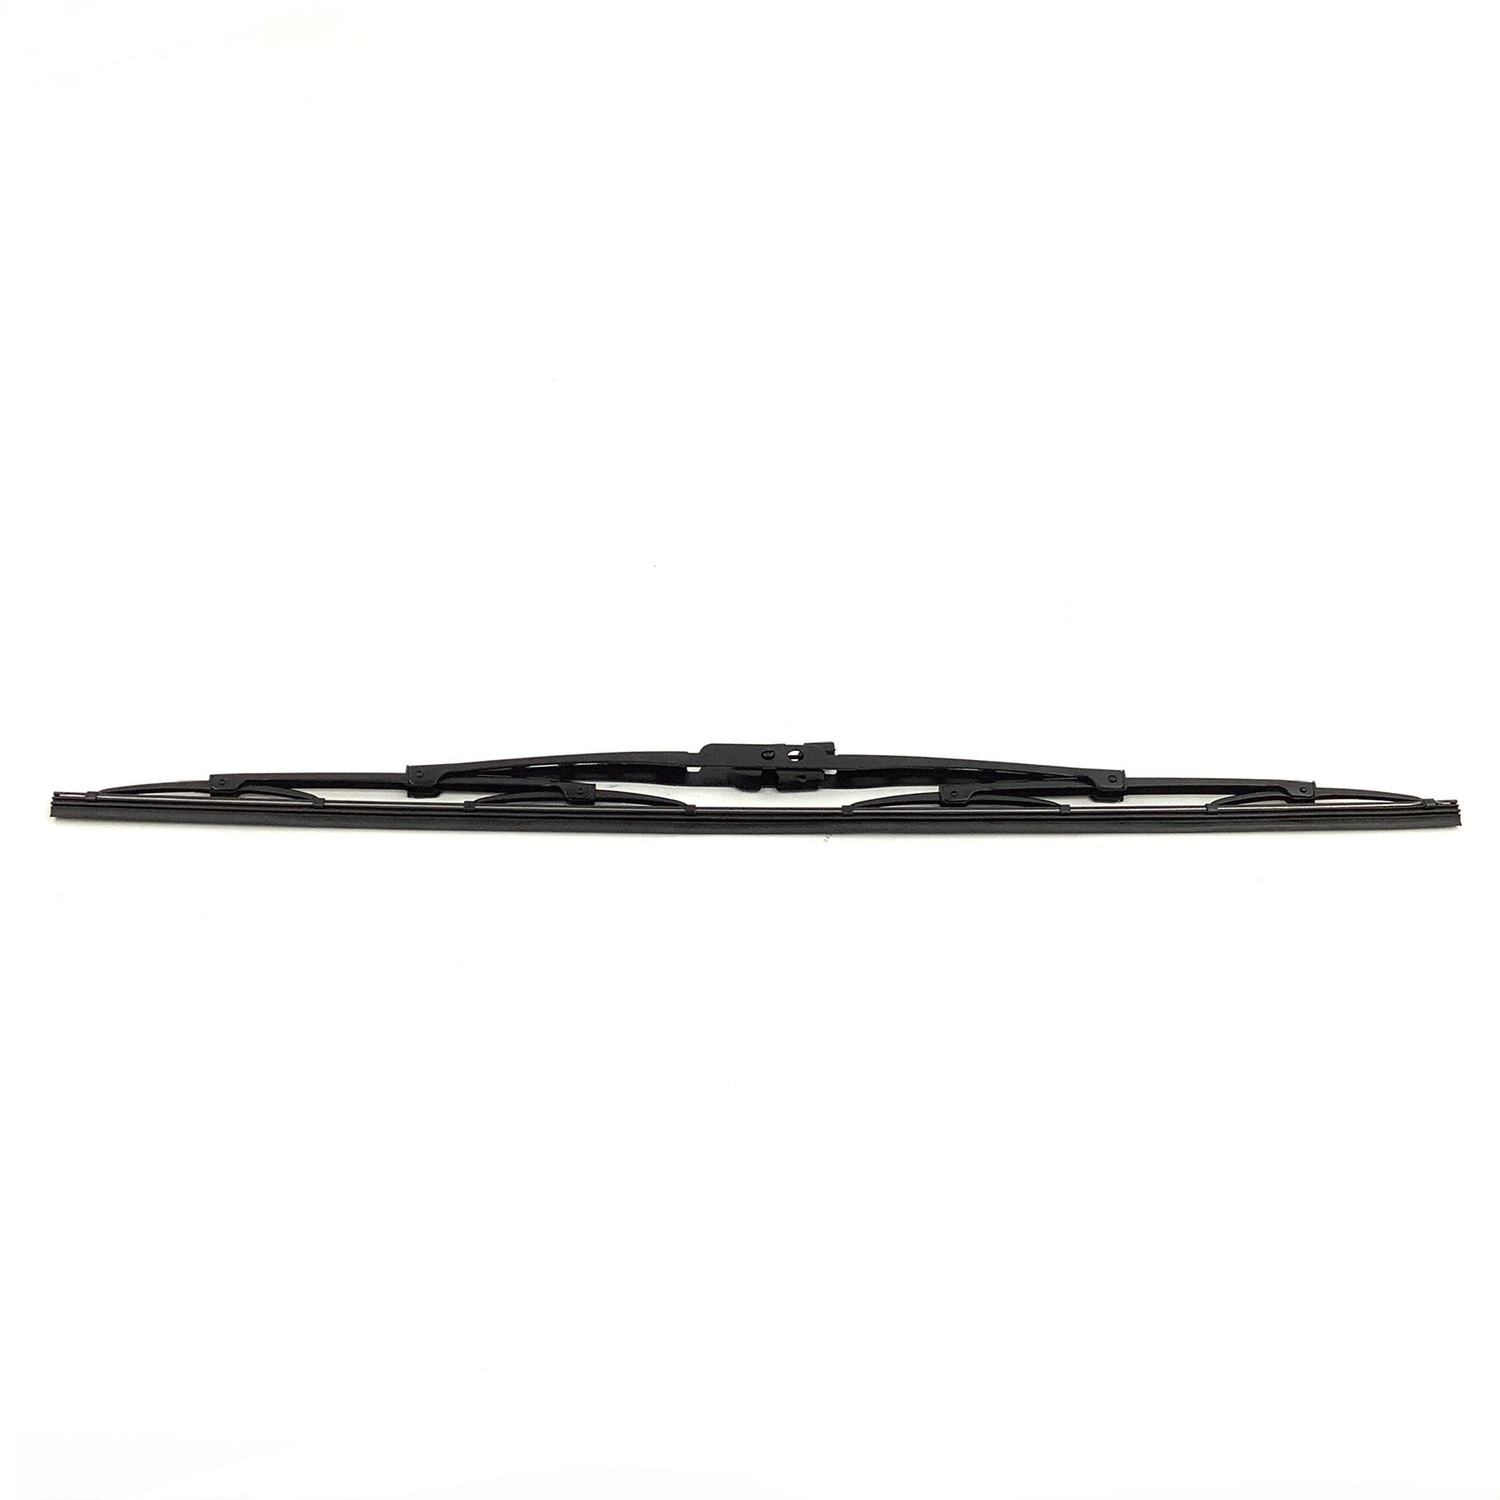 Anco Wiper Blade Assembly | 97-22 | TruckPro